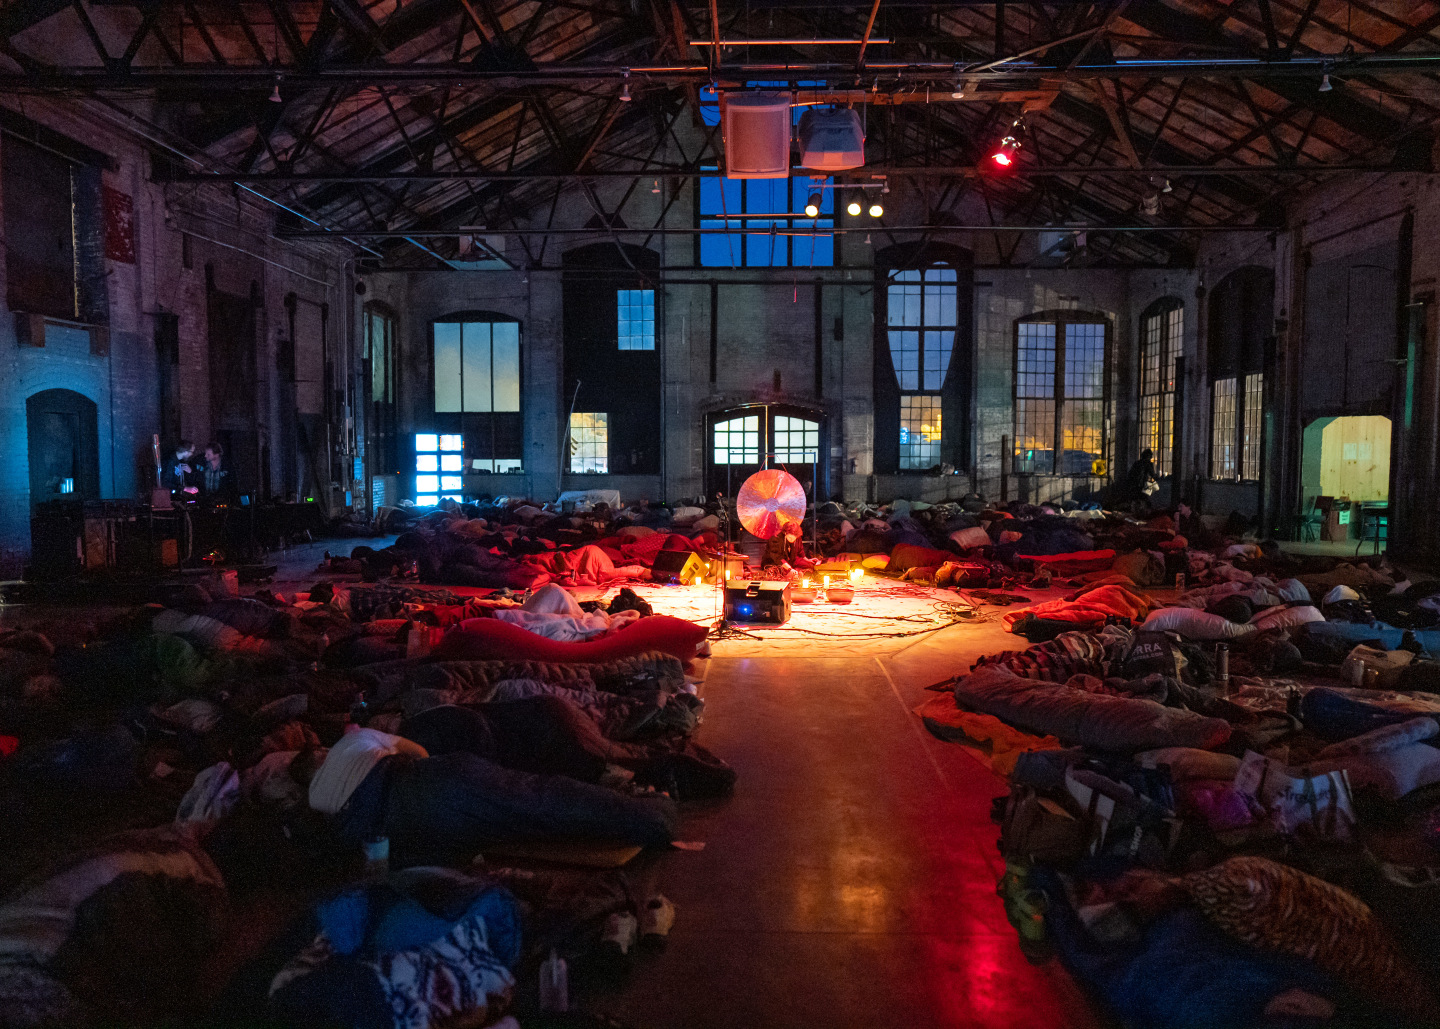 Transcending time with the artists of 24-HOUR DRONE